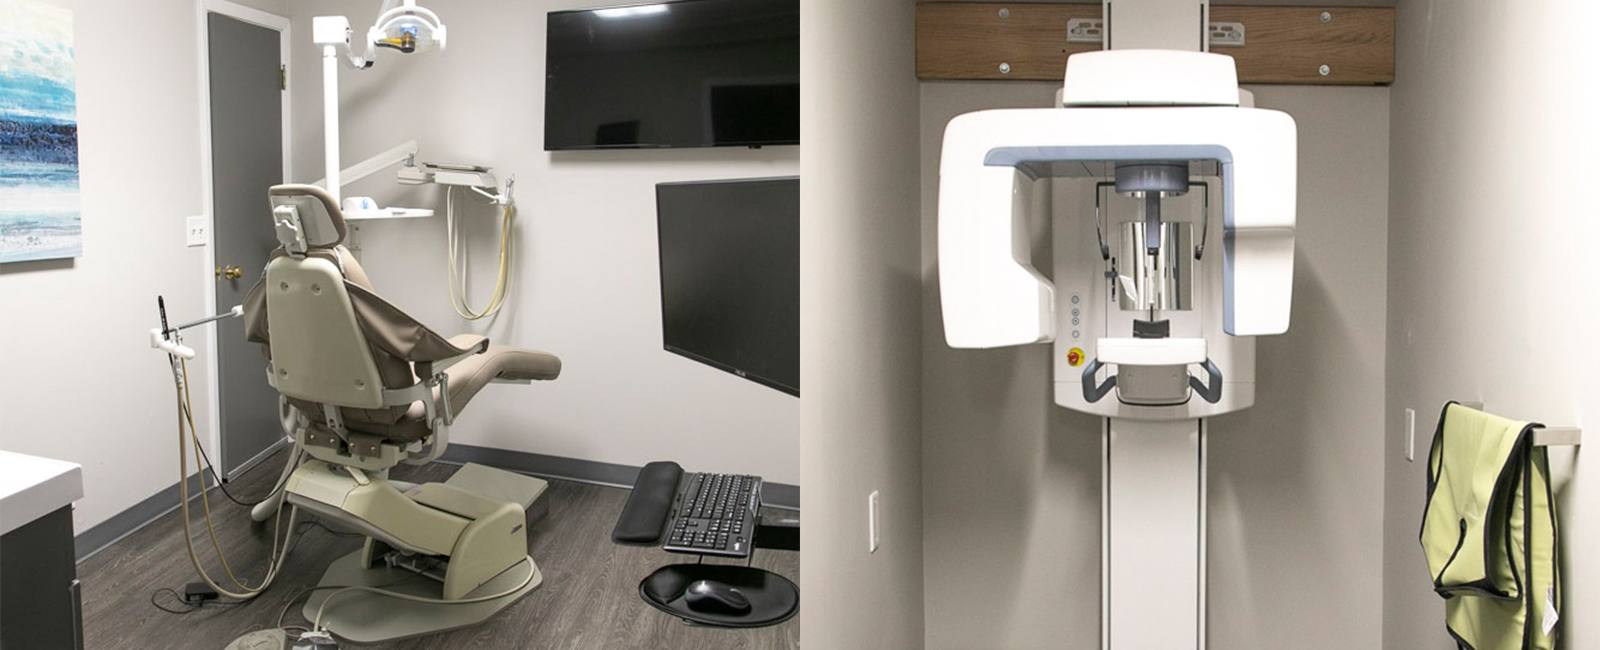 Dental treatment room and 3 C C T cone beam x-ray scanner